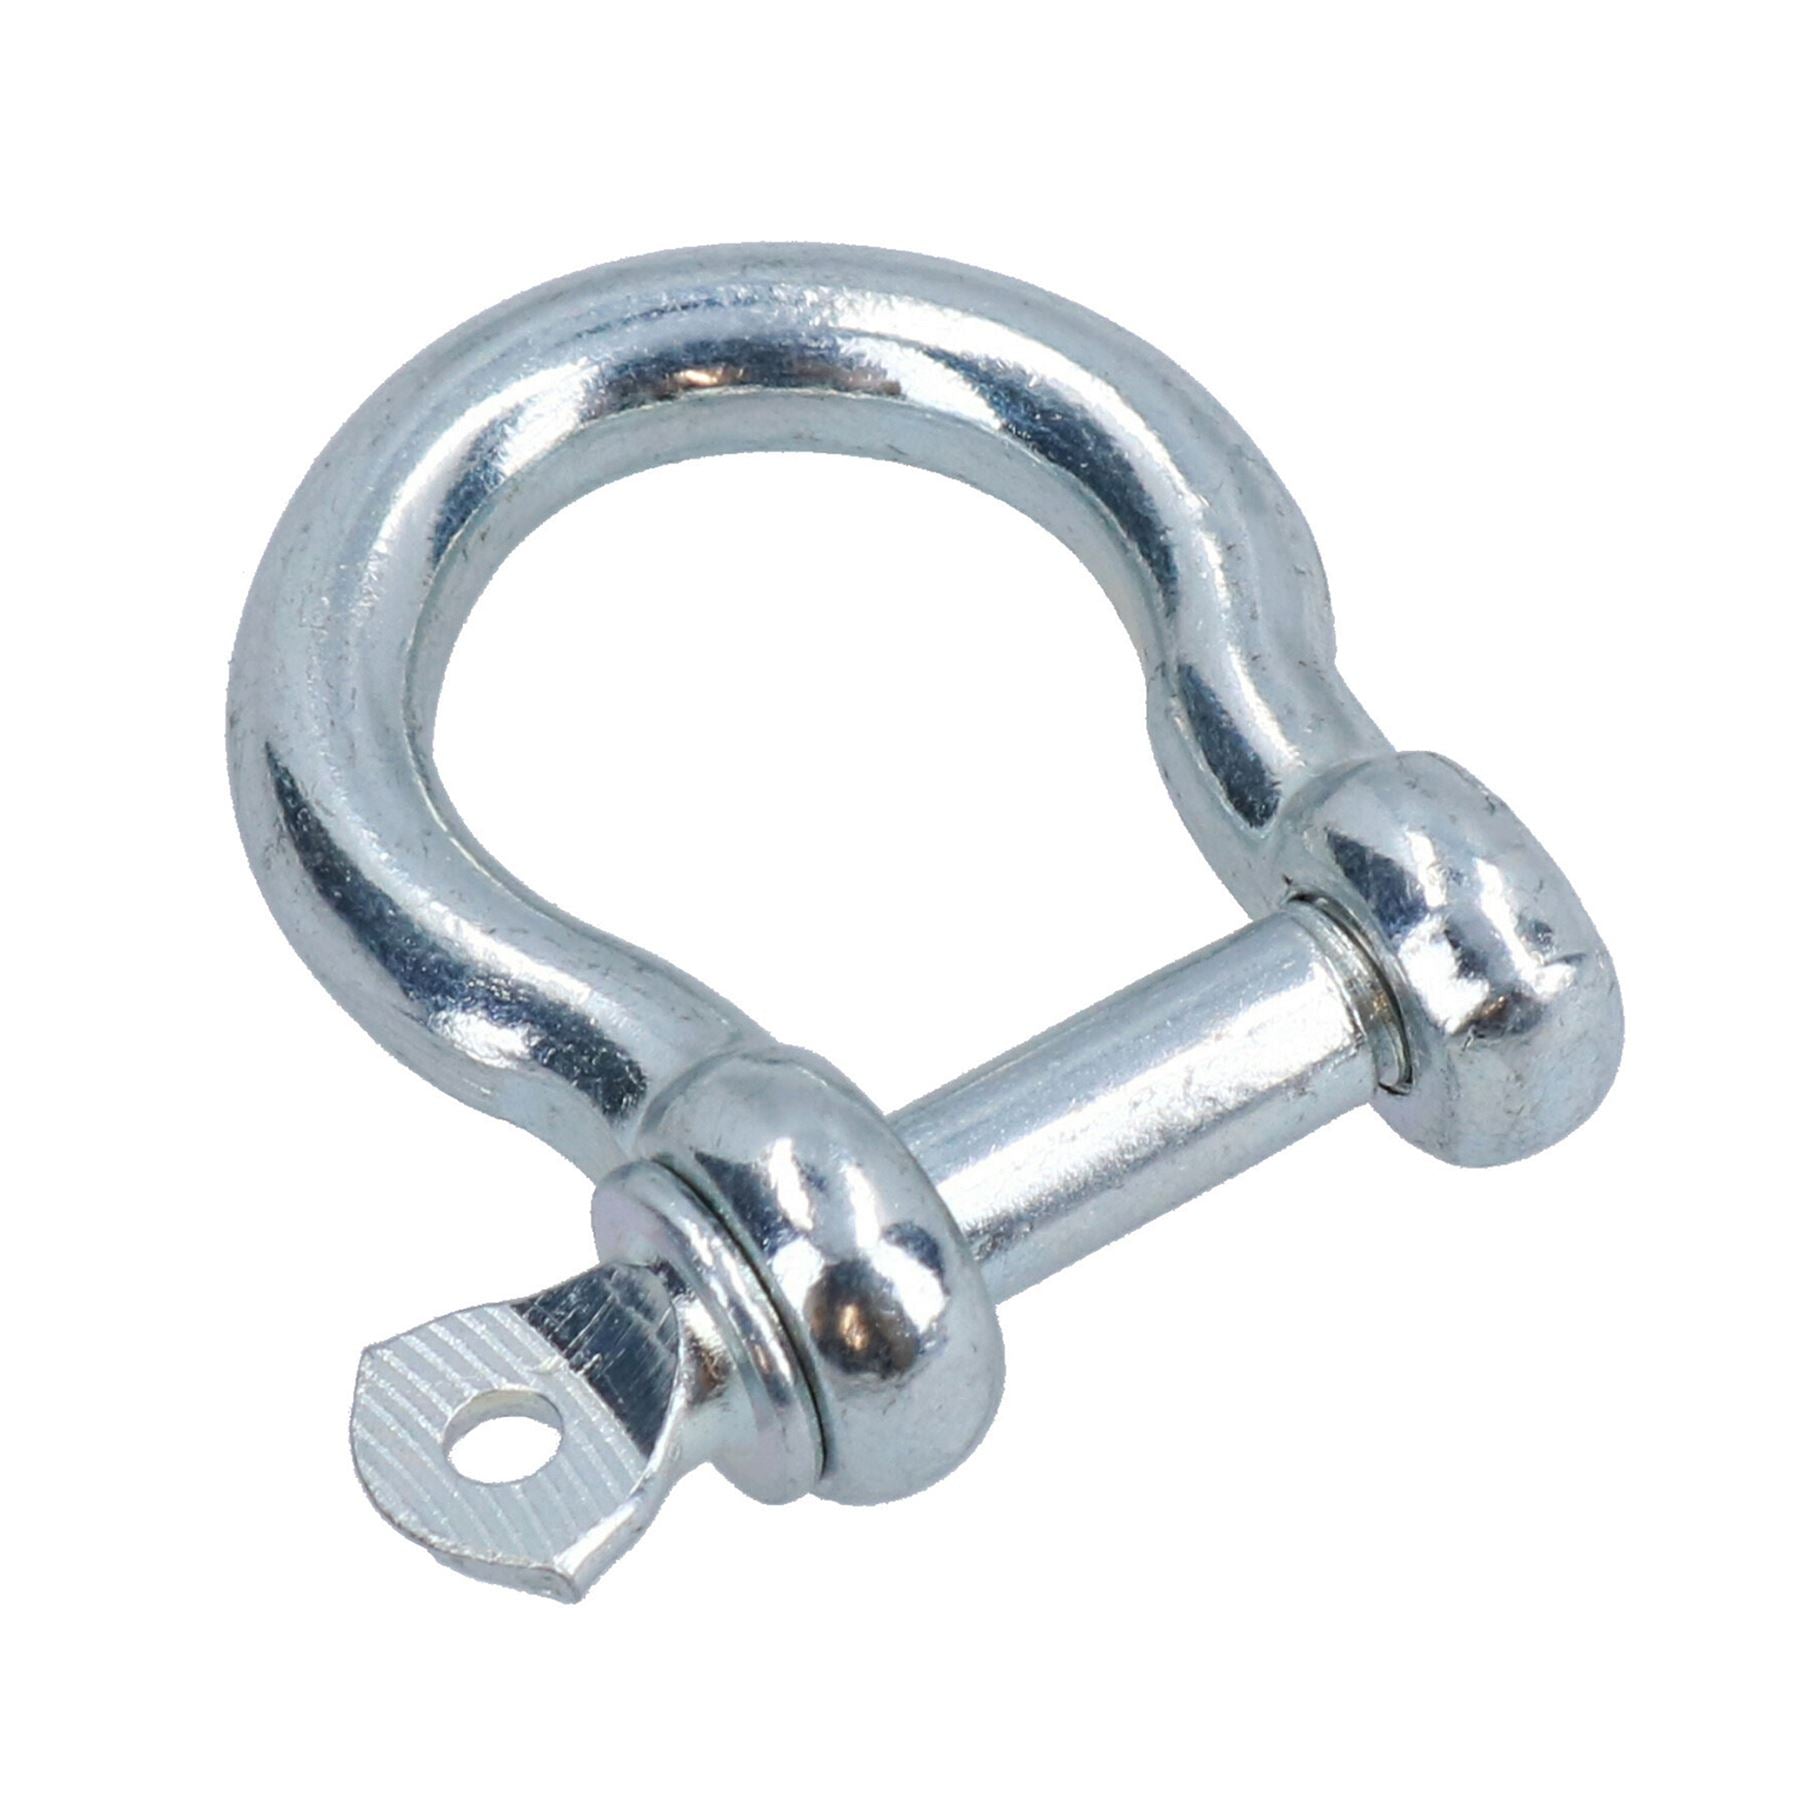 6mm Galvanised Bow Shackle Single Shackle Link Chandlery Boat Yacht